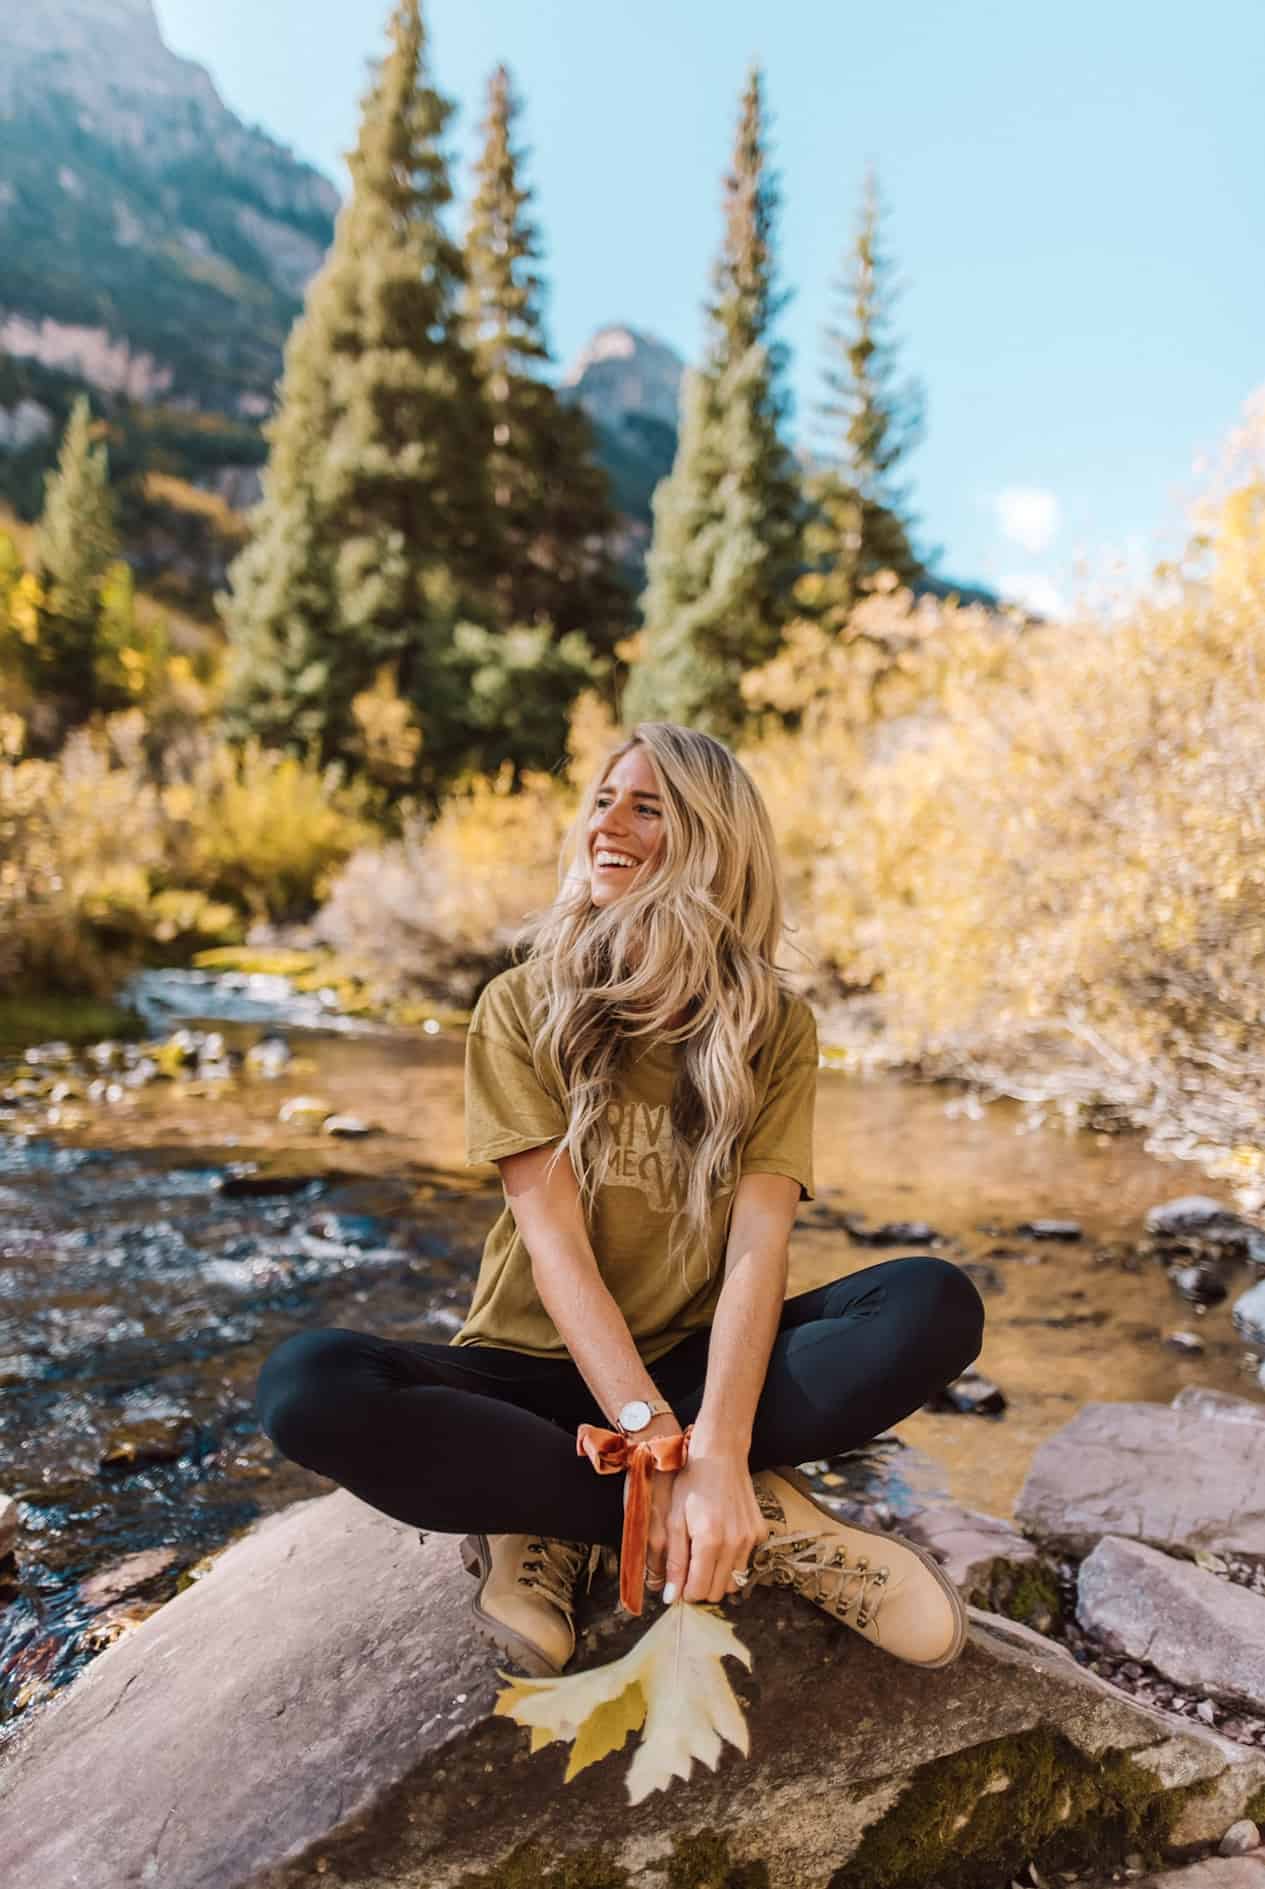 Girl near a river wearing black leggings, hiking boots, and a t-shirt.